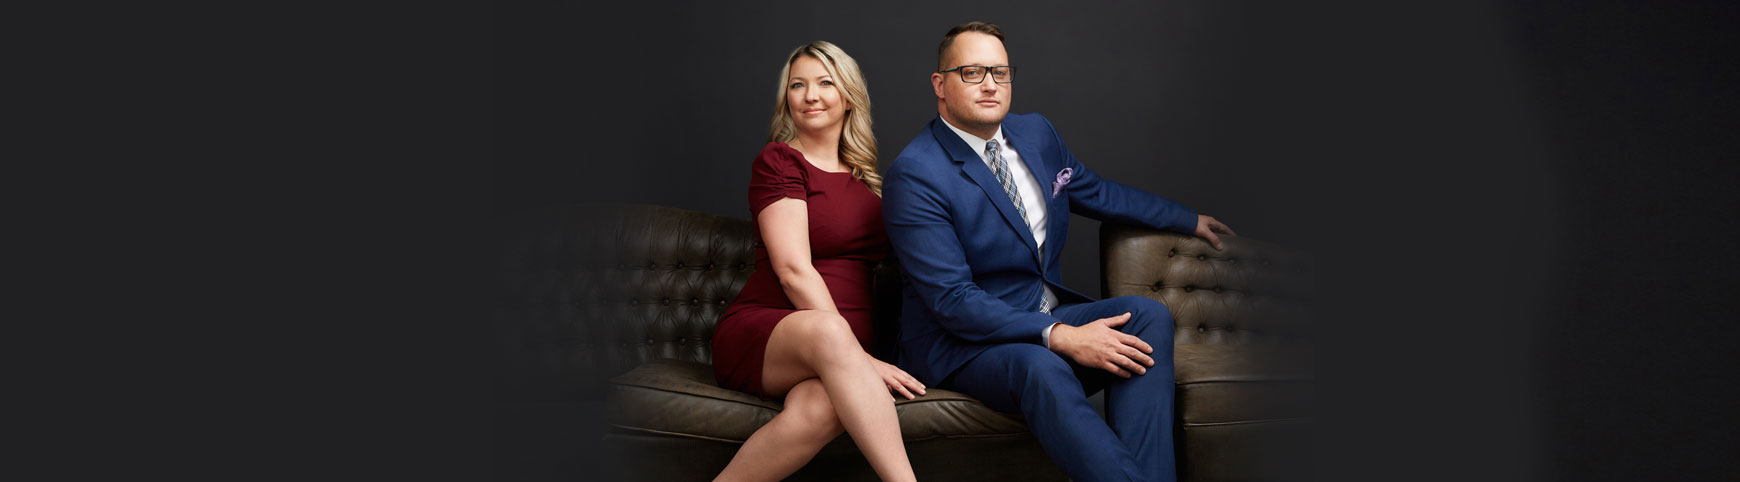 Calgary Family Central Law Firm - Our Lawyers